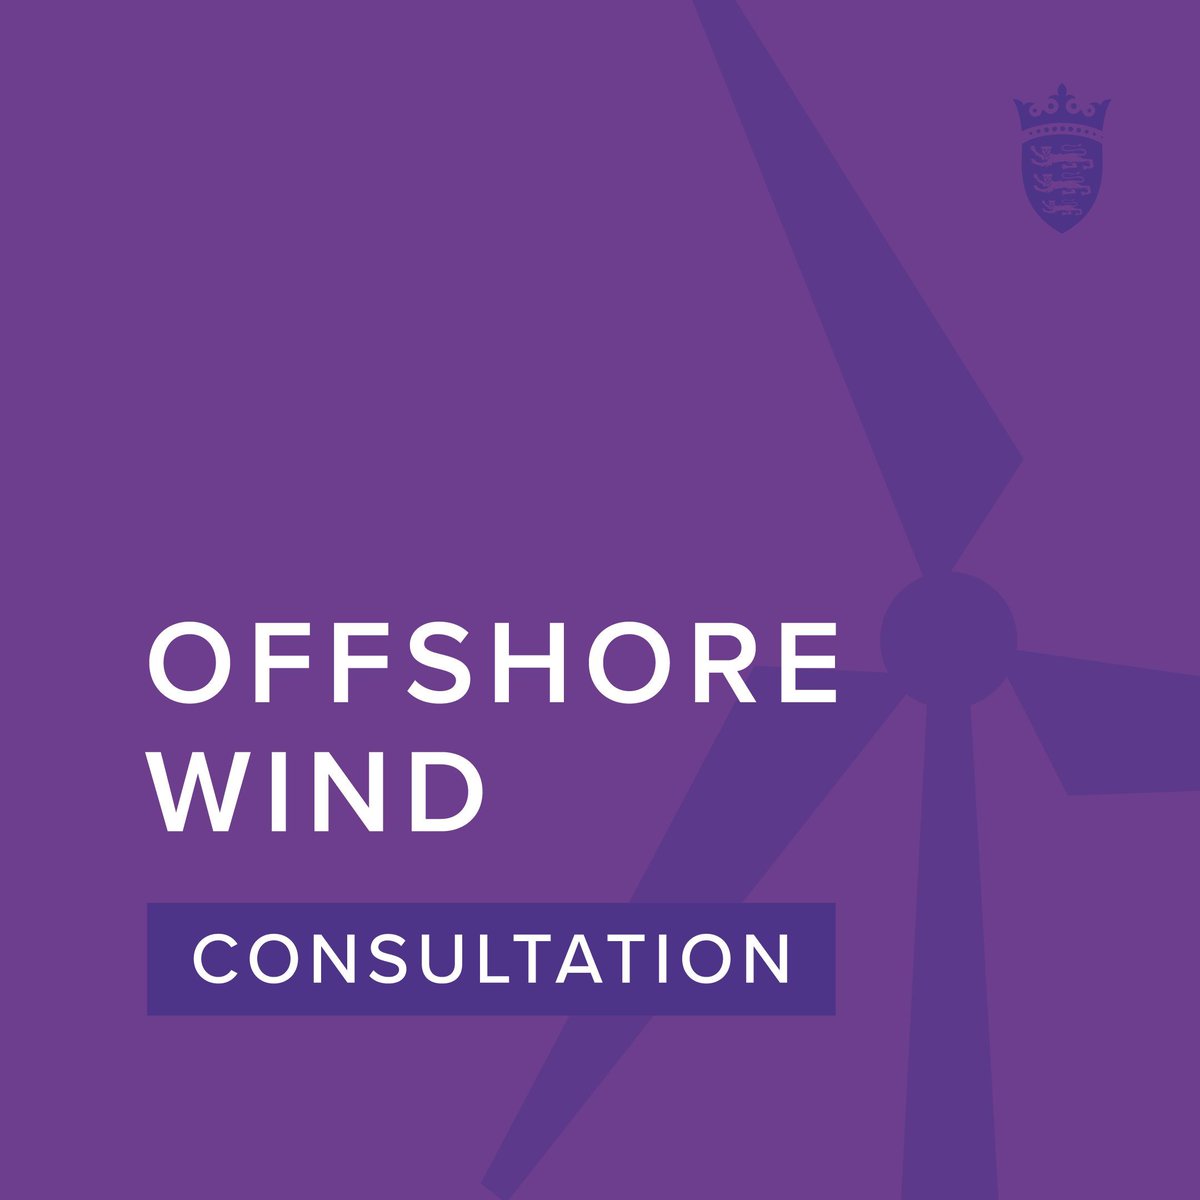 Around 1,000 people completed the survey in the recent consultation on proposals for an offshore wind farm off Jersey’s southwest coast. The responses and results have now been published ahead of the States in-principle debate in April. Read the report: statesassembly.gov.je/assemblyreport…